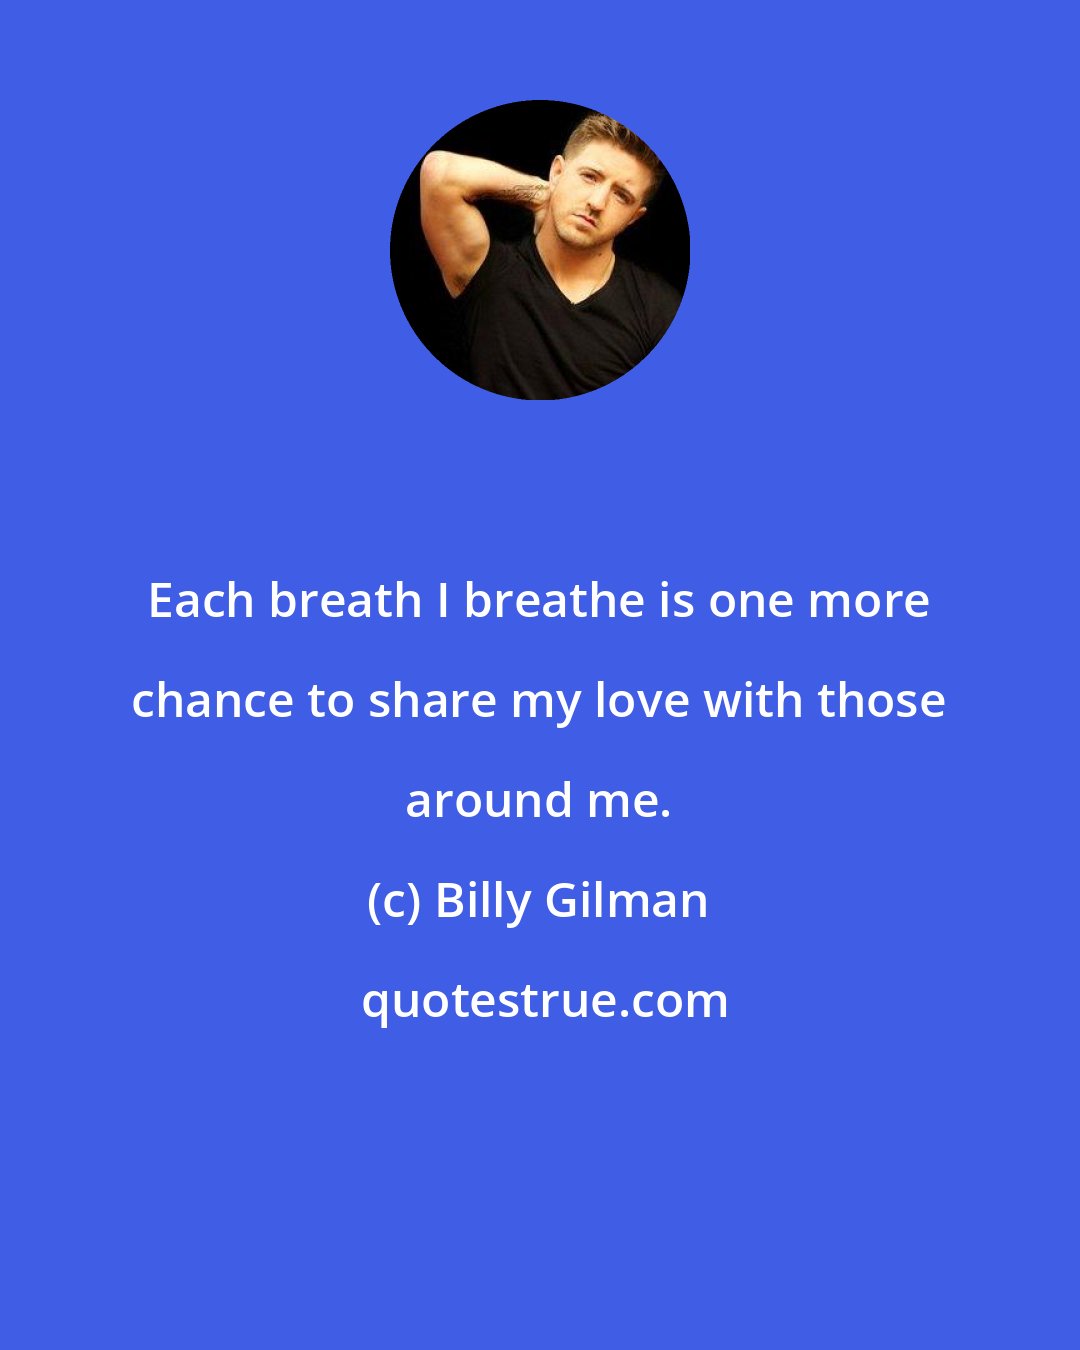 Billy Gilman: Each breath I breathe is one more chance to share my love with those around me.